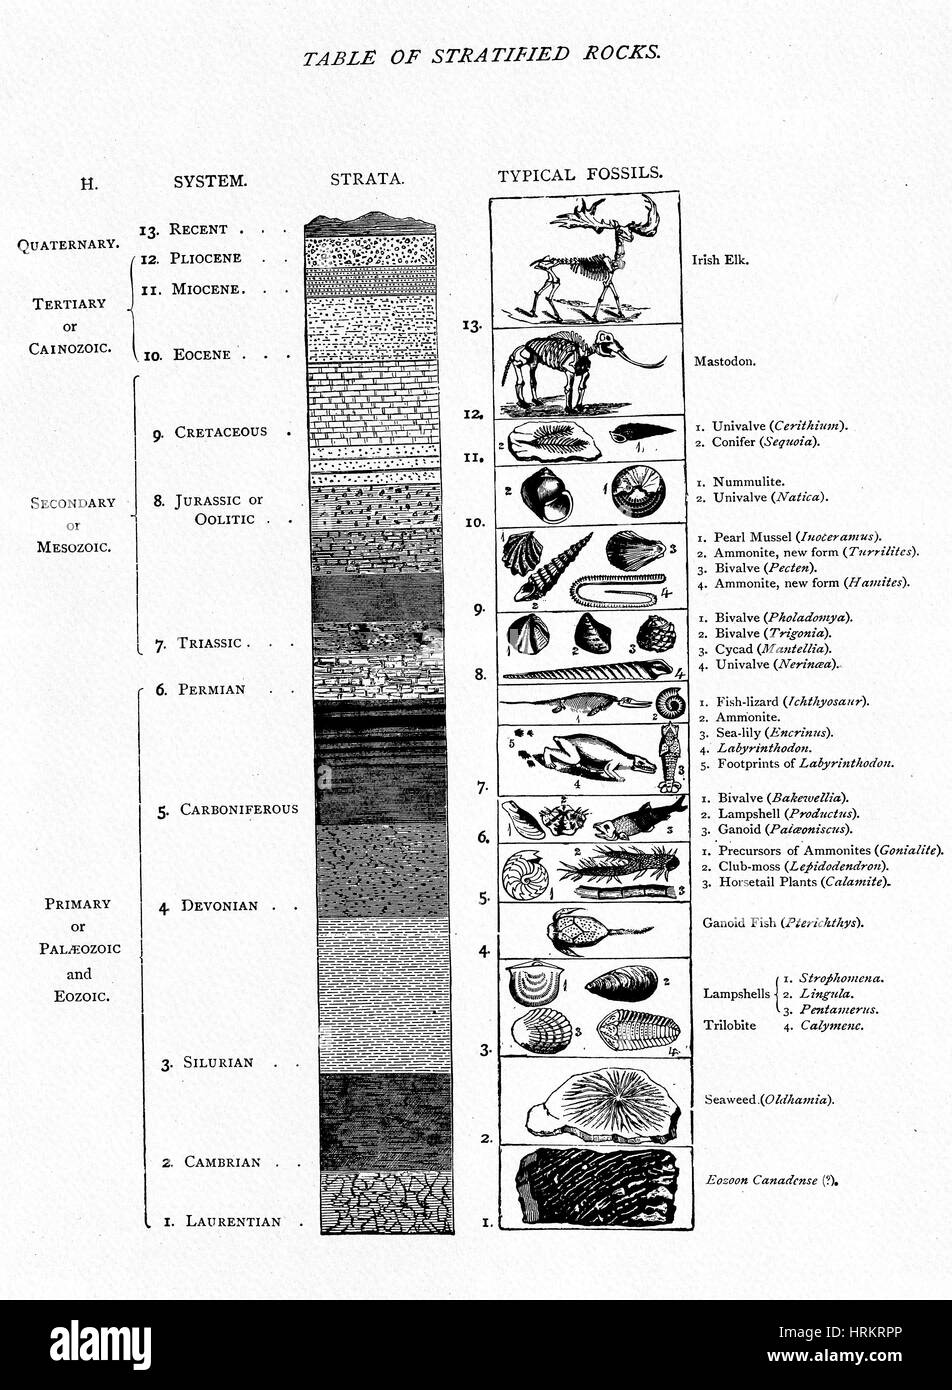 Table of Stratified Rocks, 1888 Stock Photo